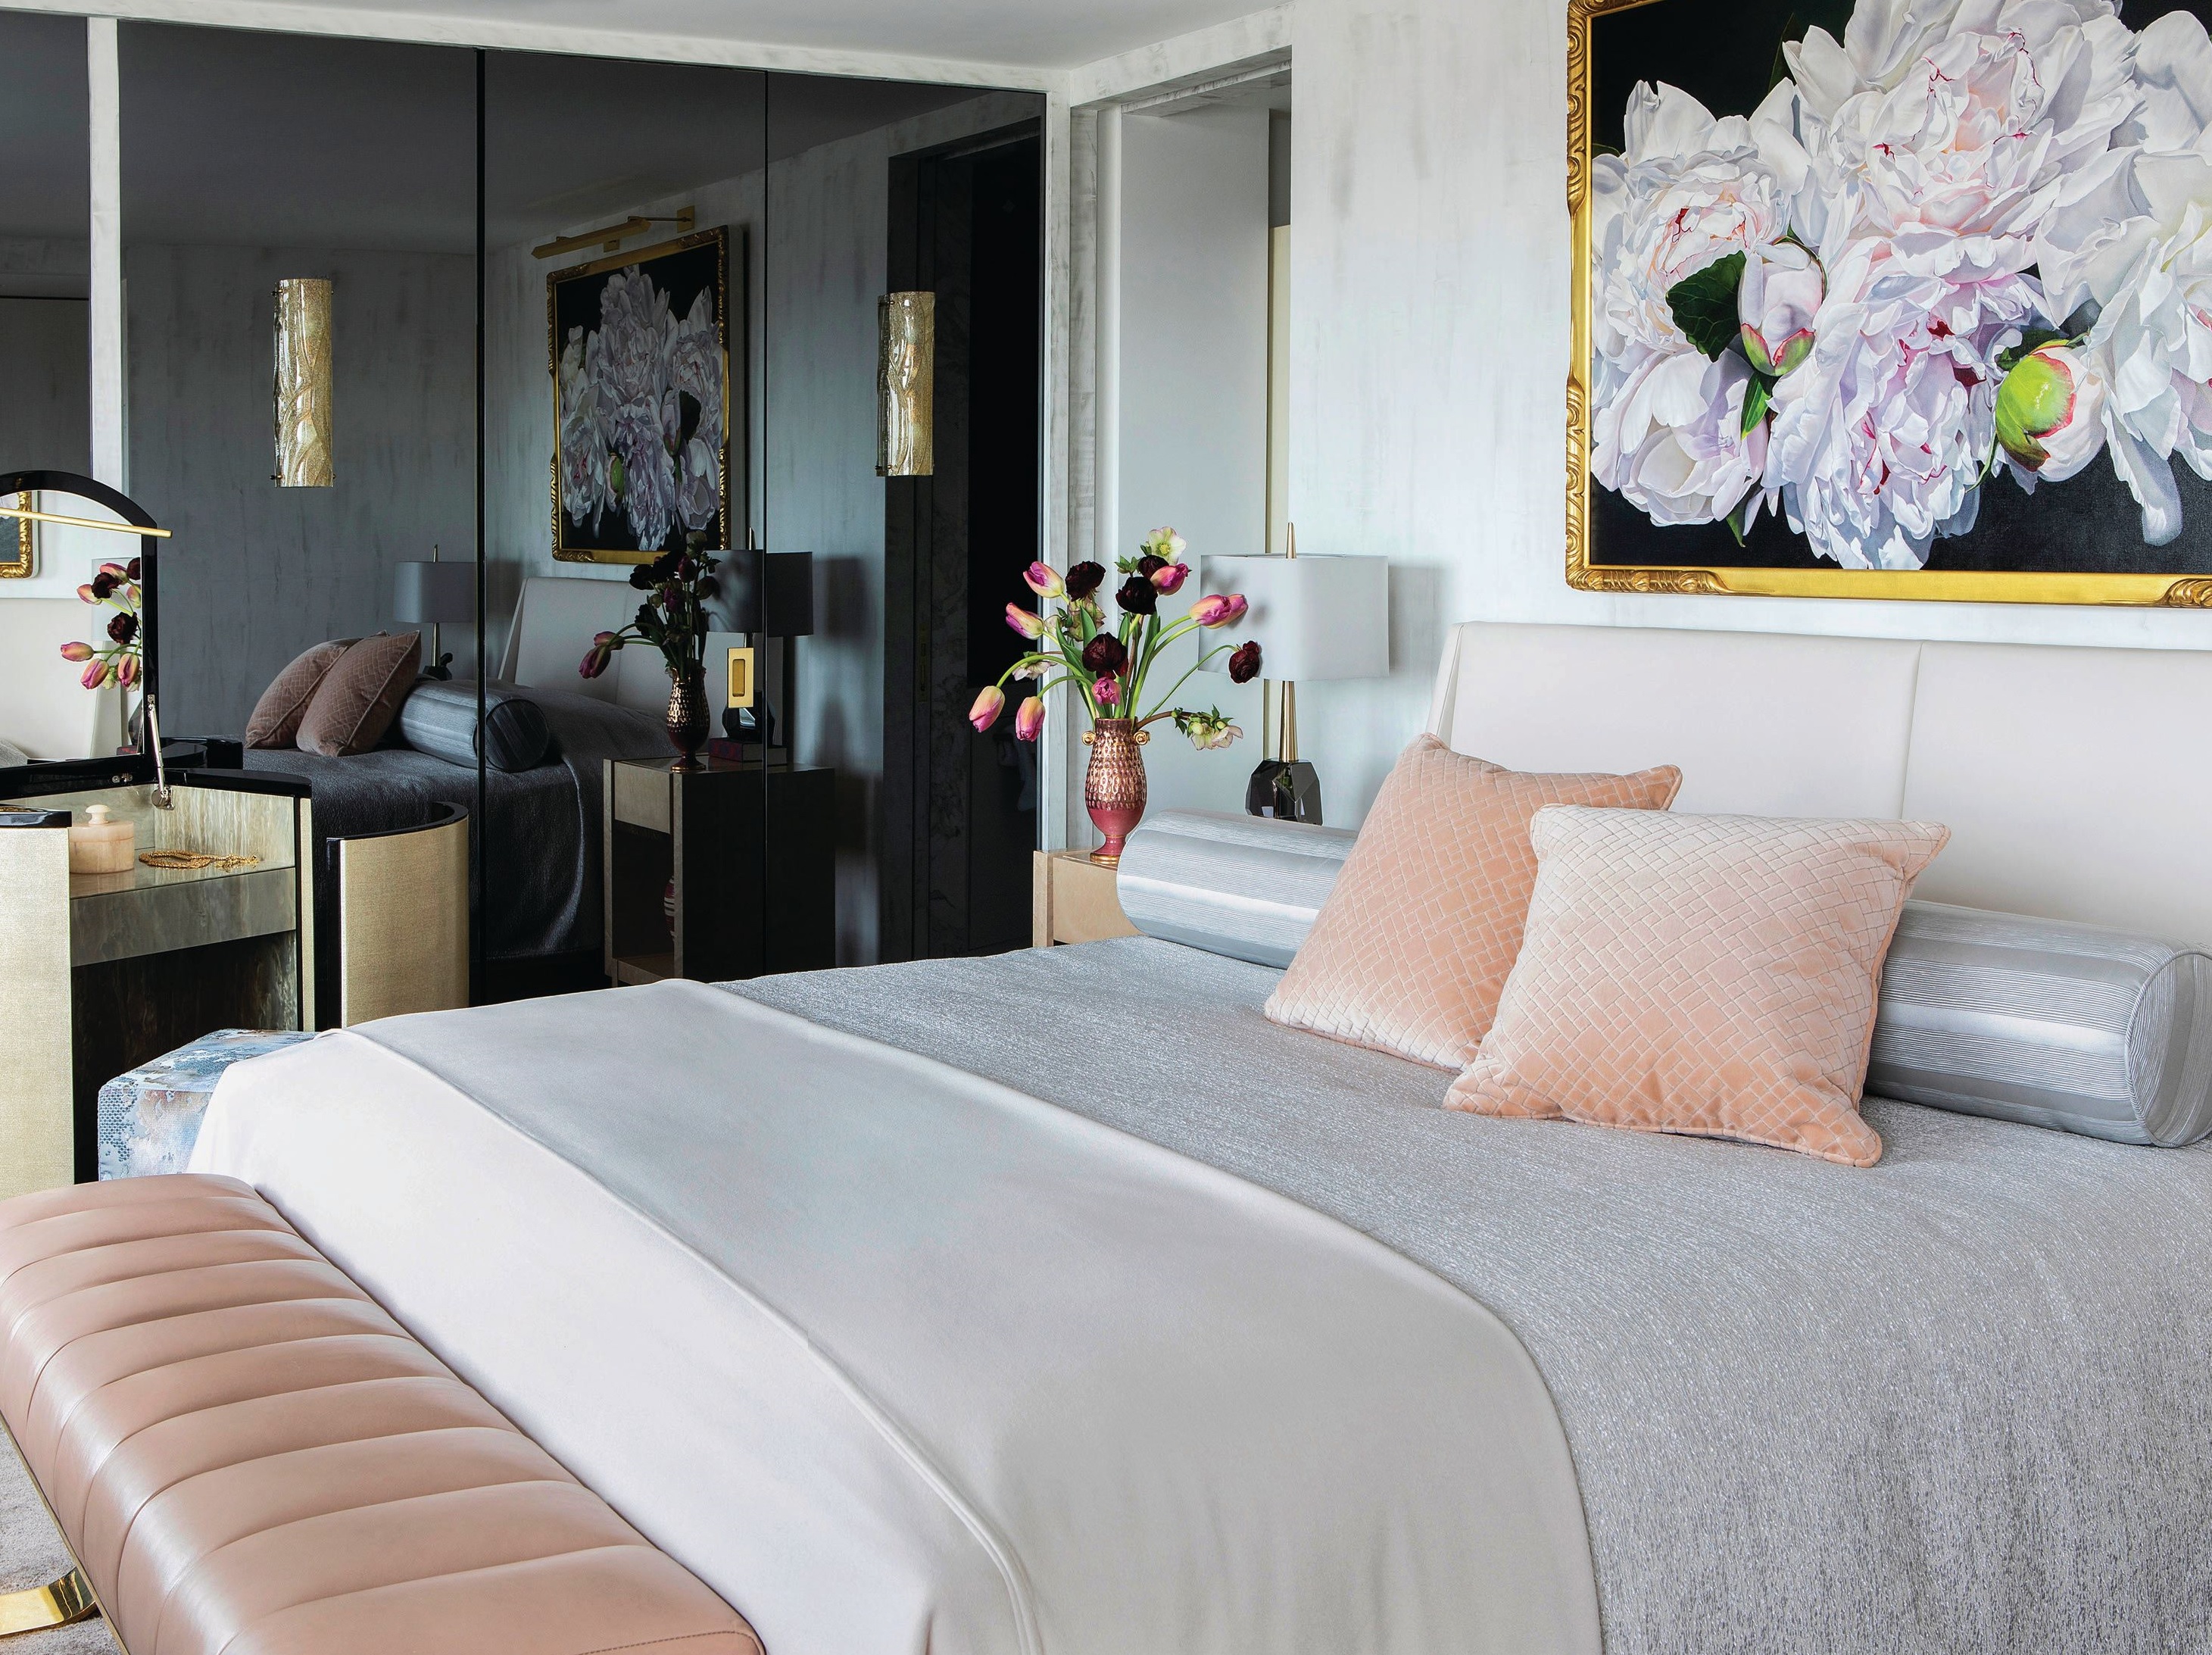 MCC Millwork put its touch on the bedrooms’ closets and dressers. Photographed by Costas Picadas